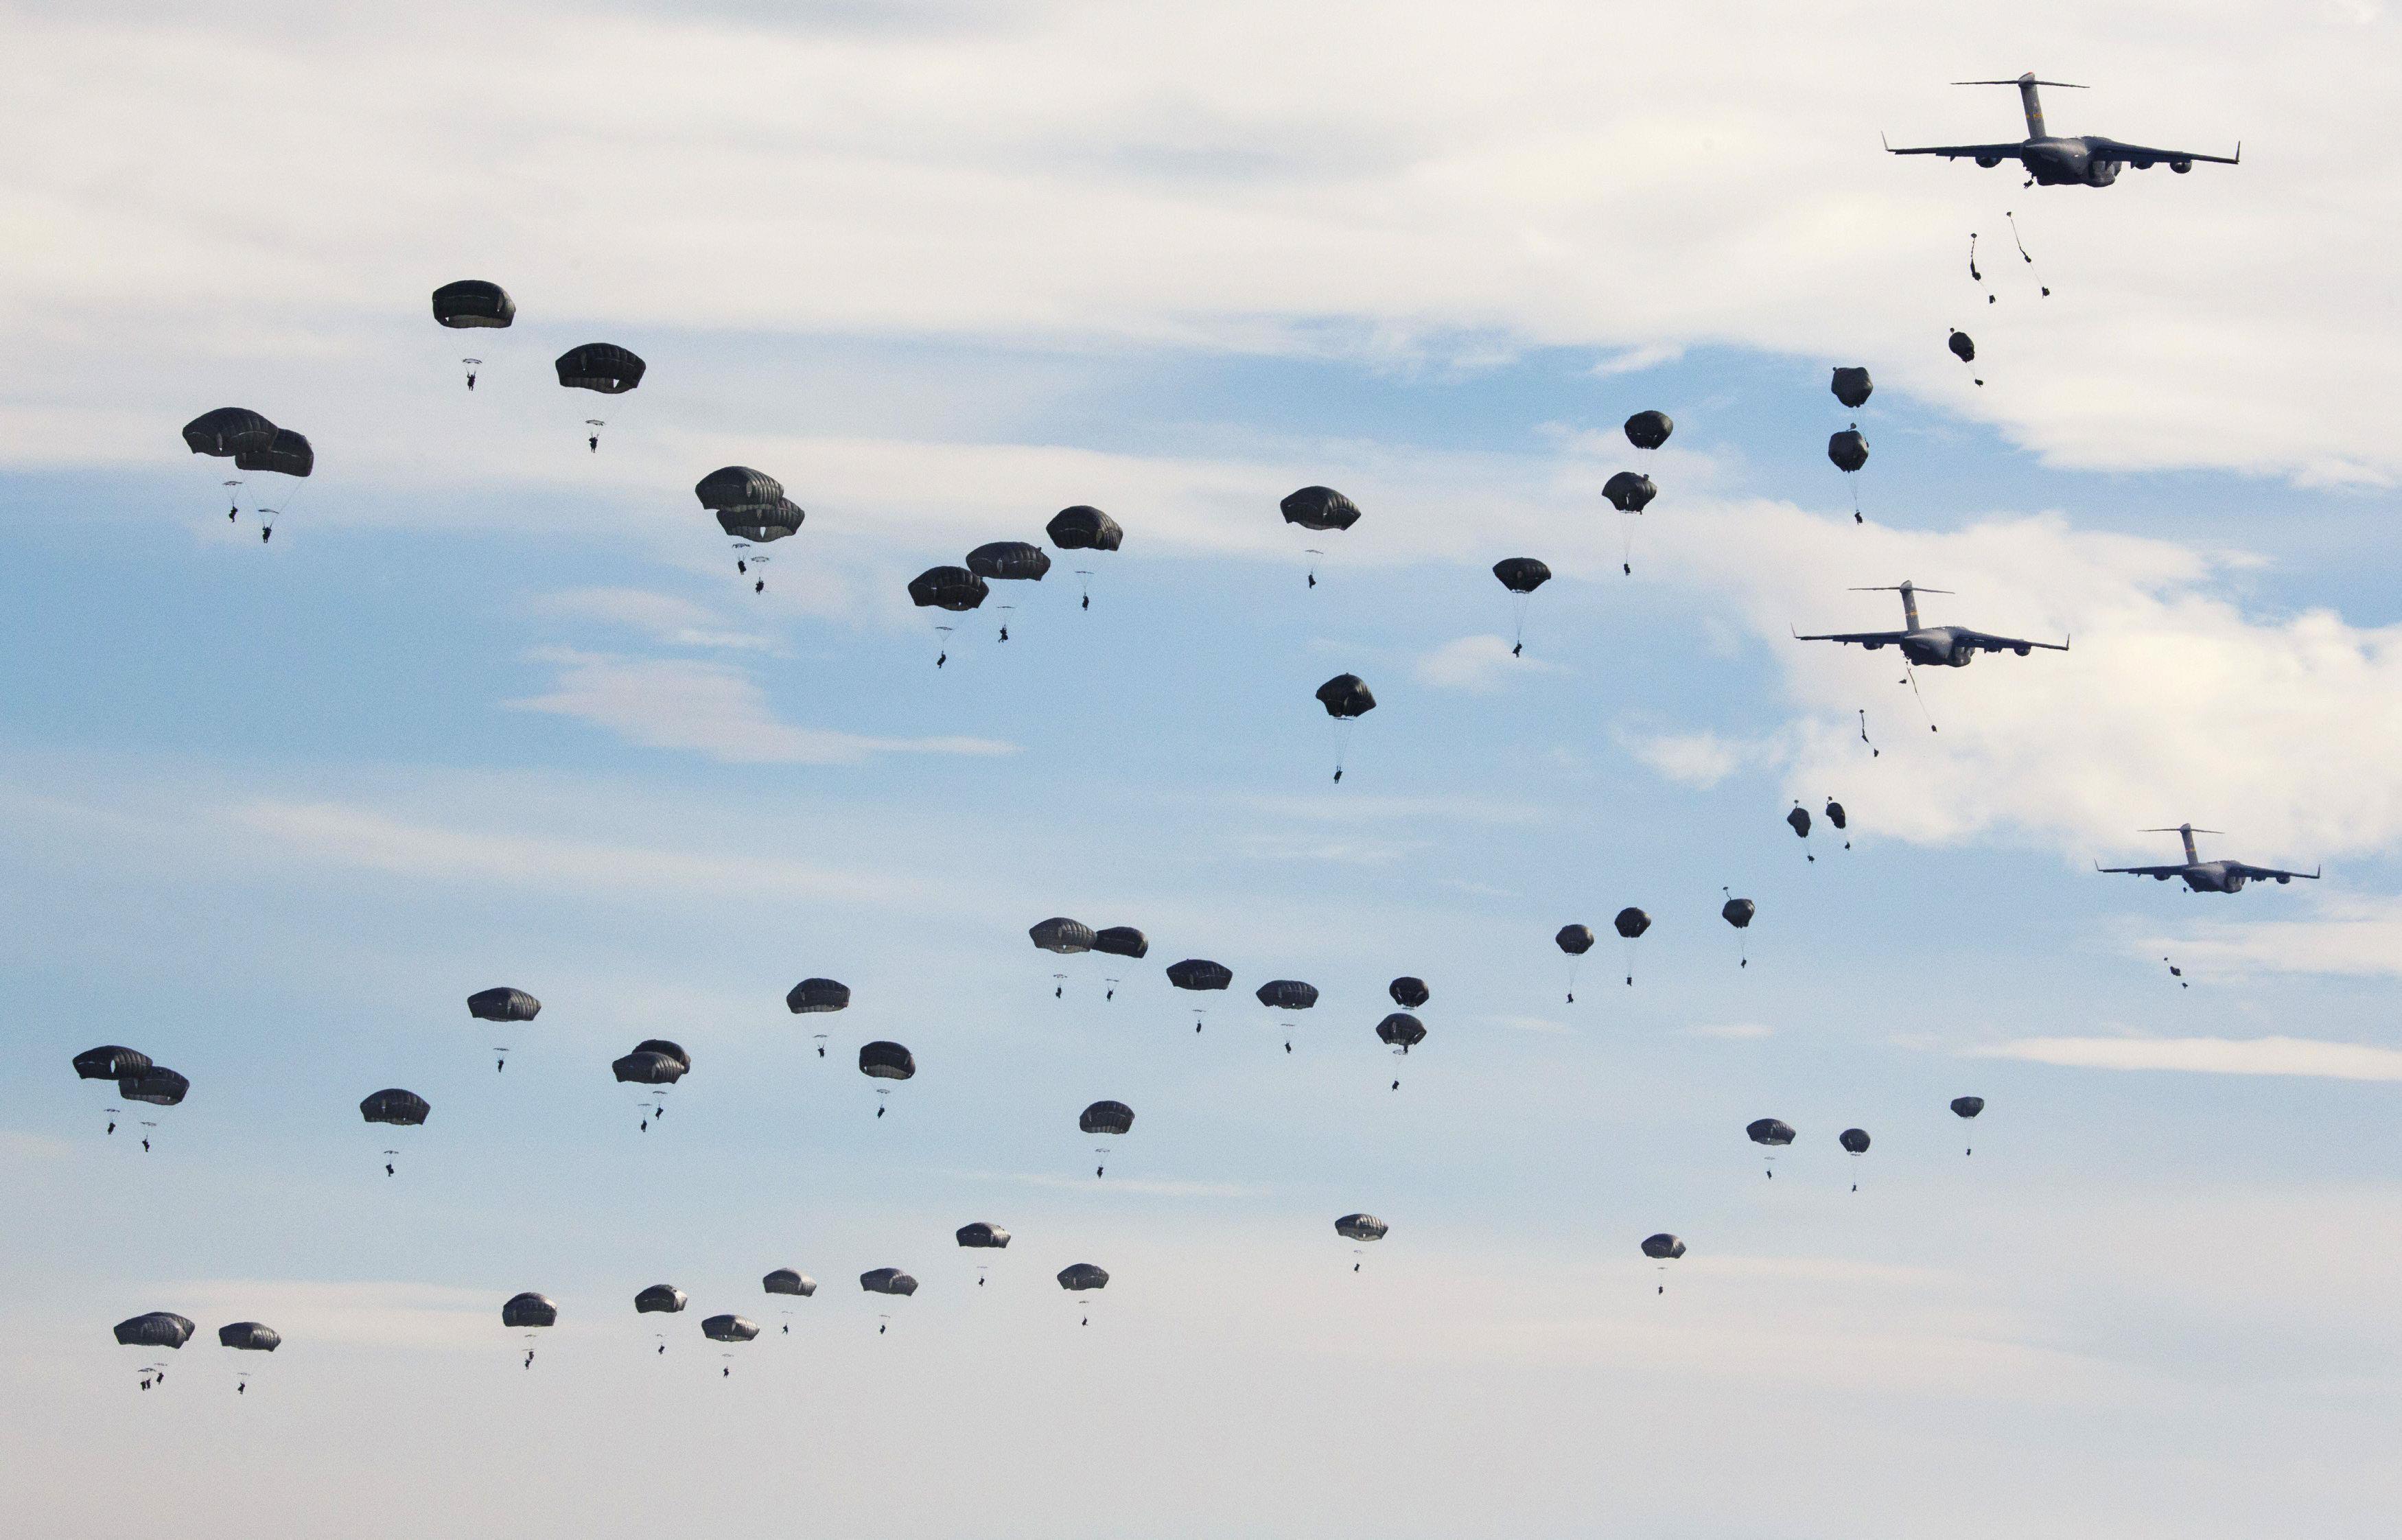 U.S. Paratroopers from the 82nd Airborne Division participate in a massive airdrop from C-17 Globema